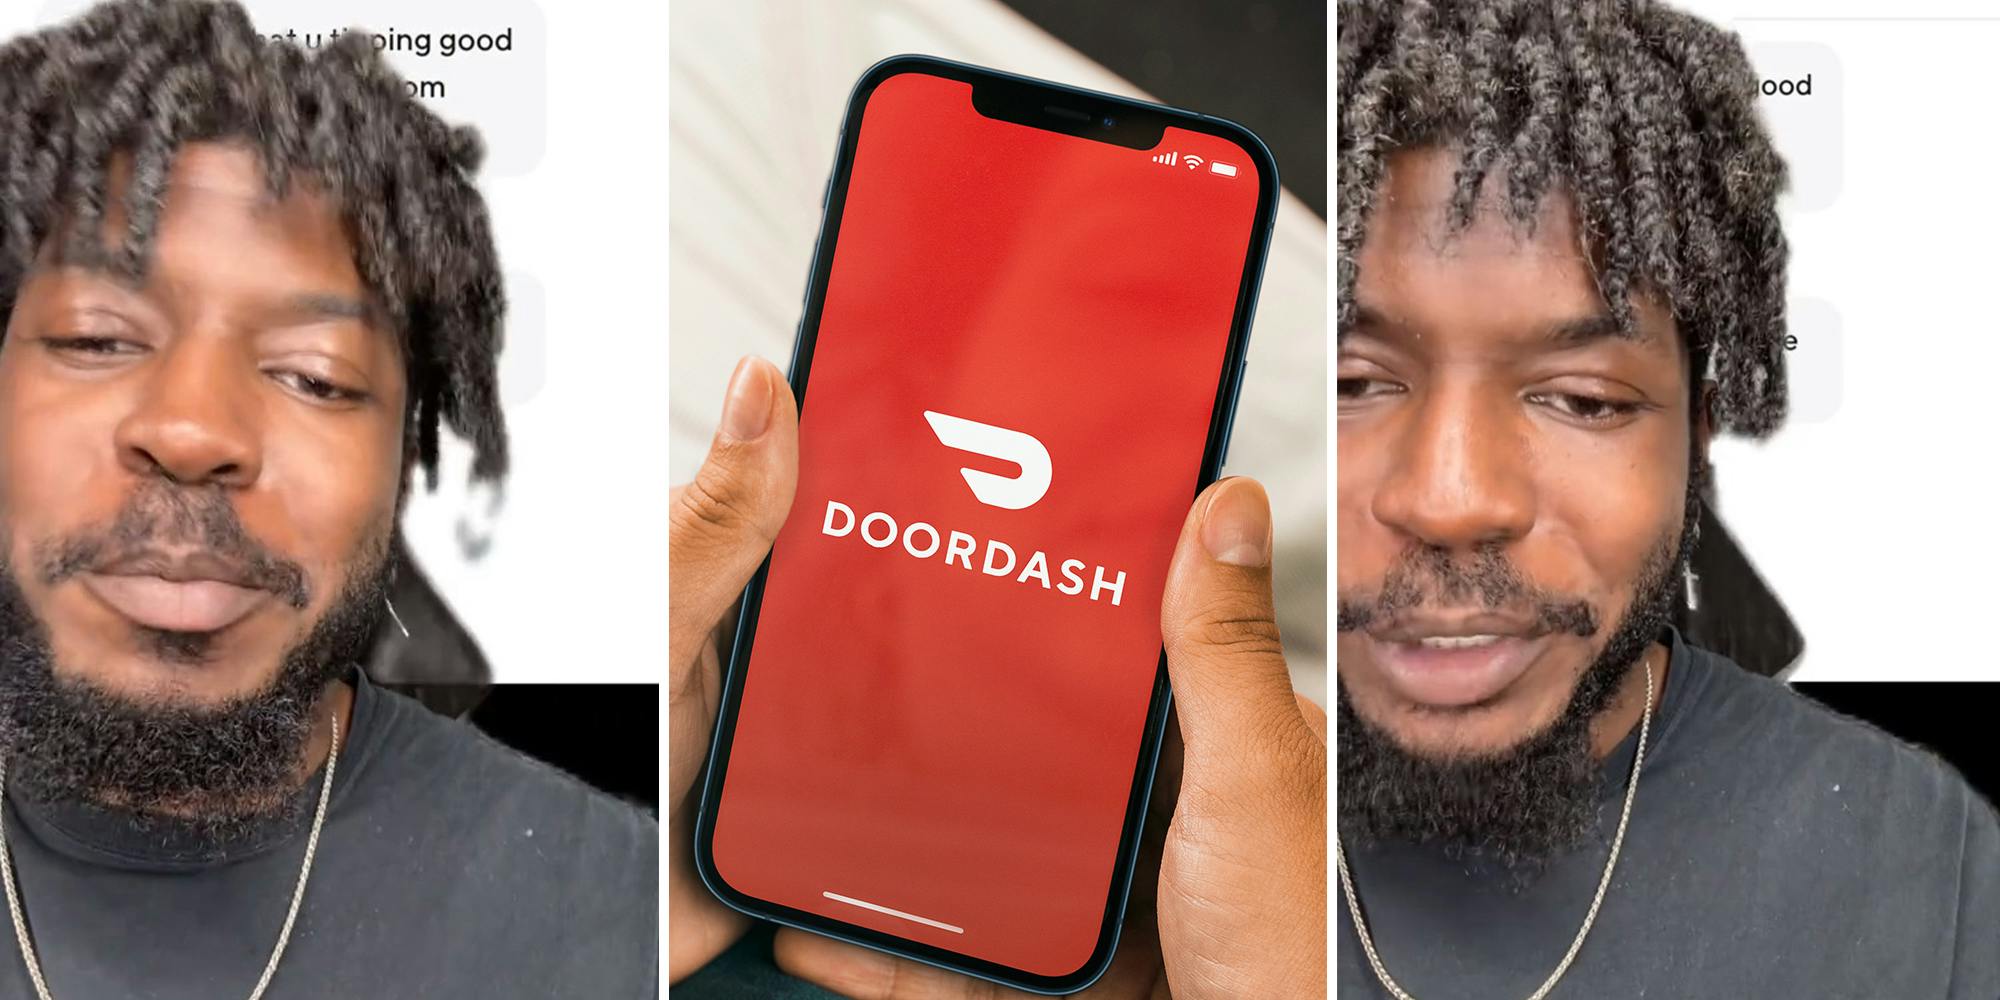 DoorDash driver asks customer to give him a larger tip before dropping off delivery